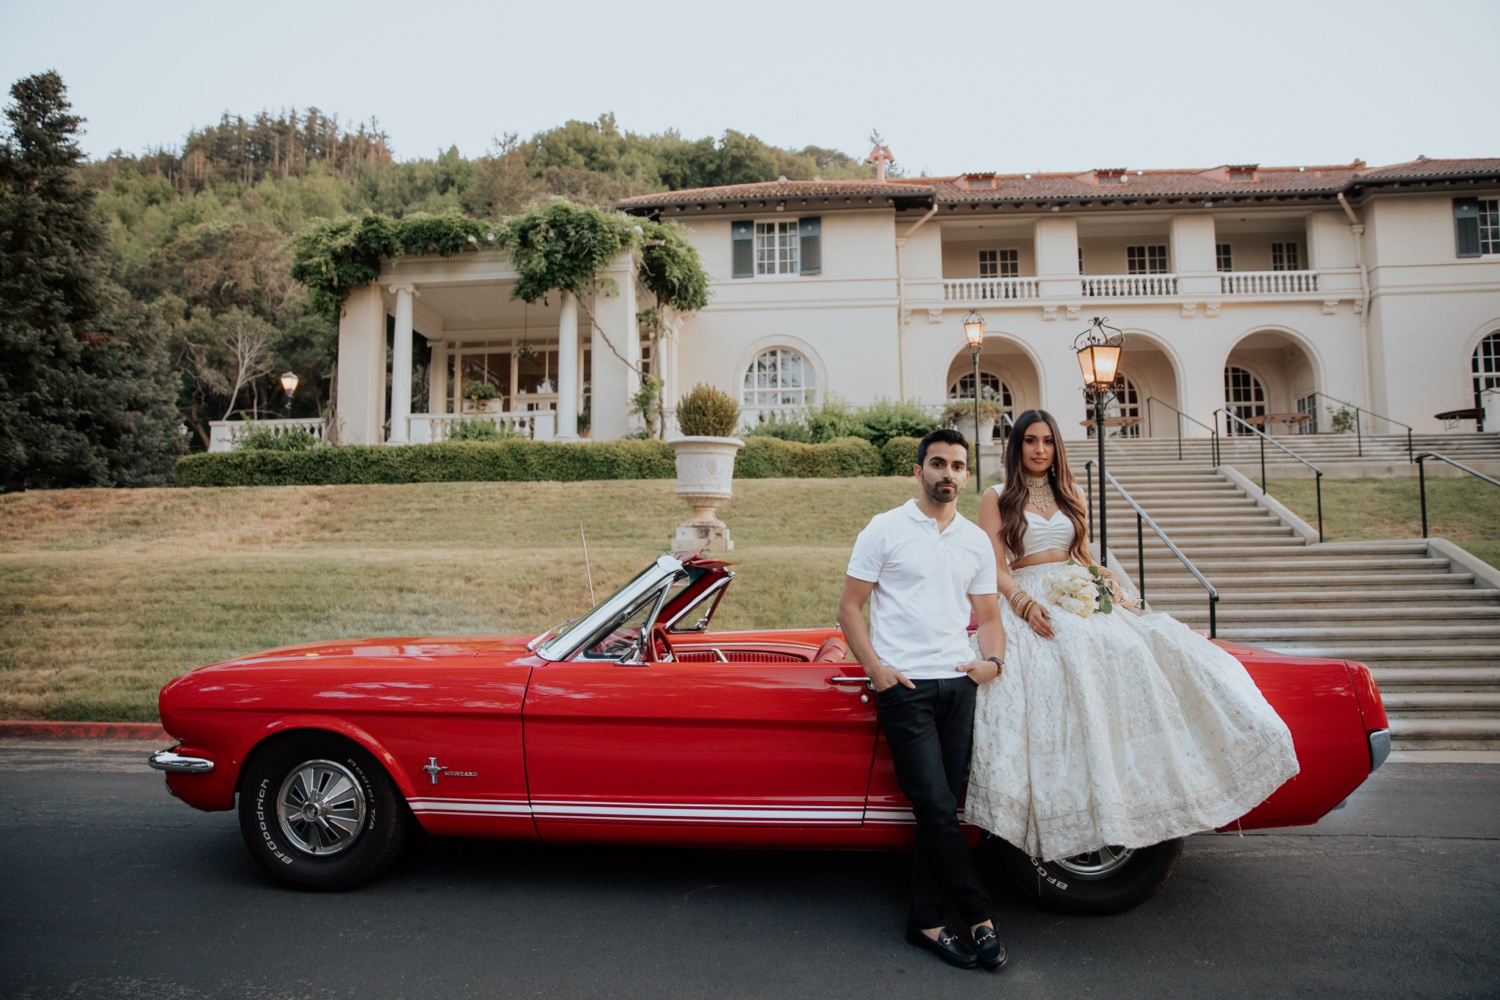 Smiling Groom Embracing Bride In Vintage Car Free Stock Photo and Image  478727520